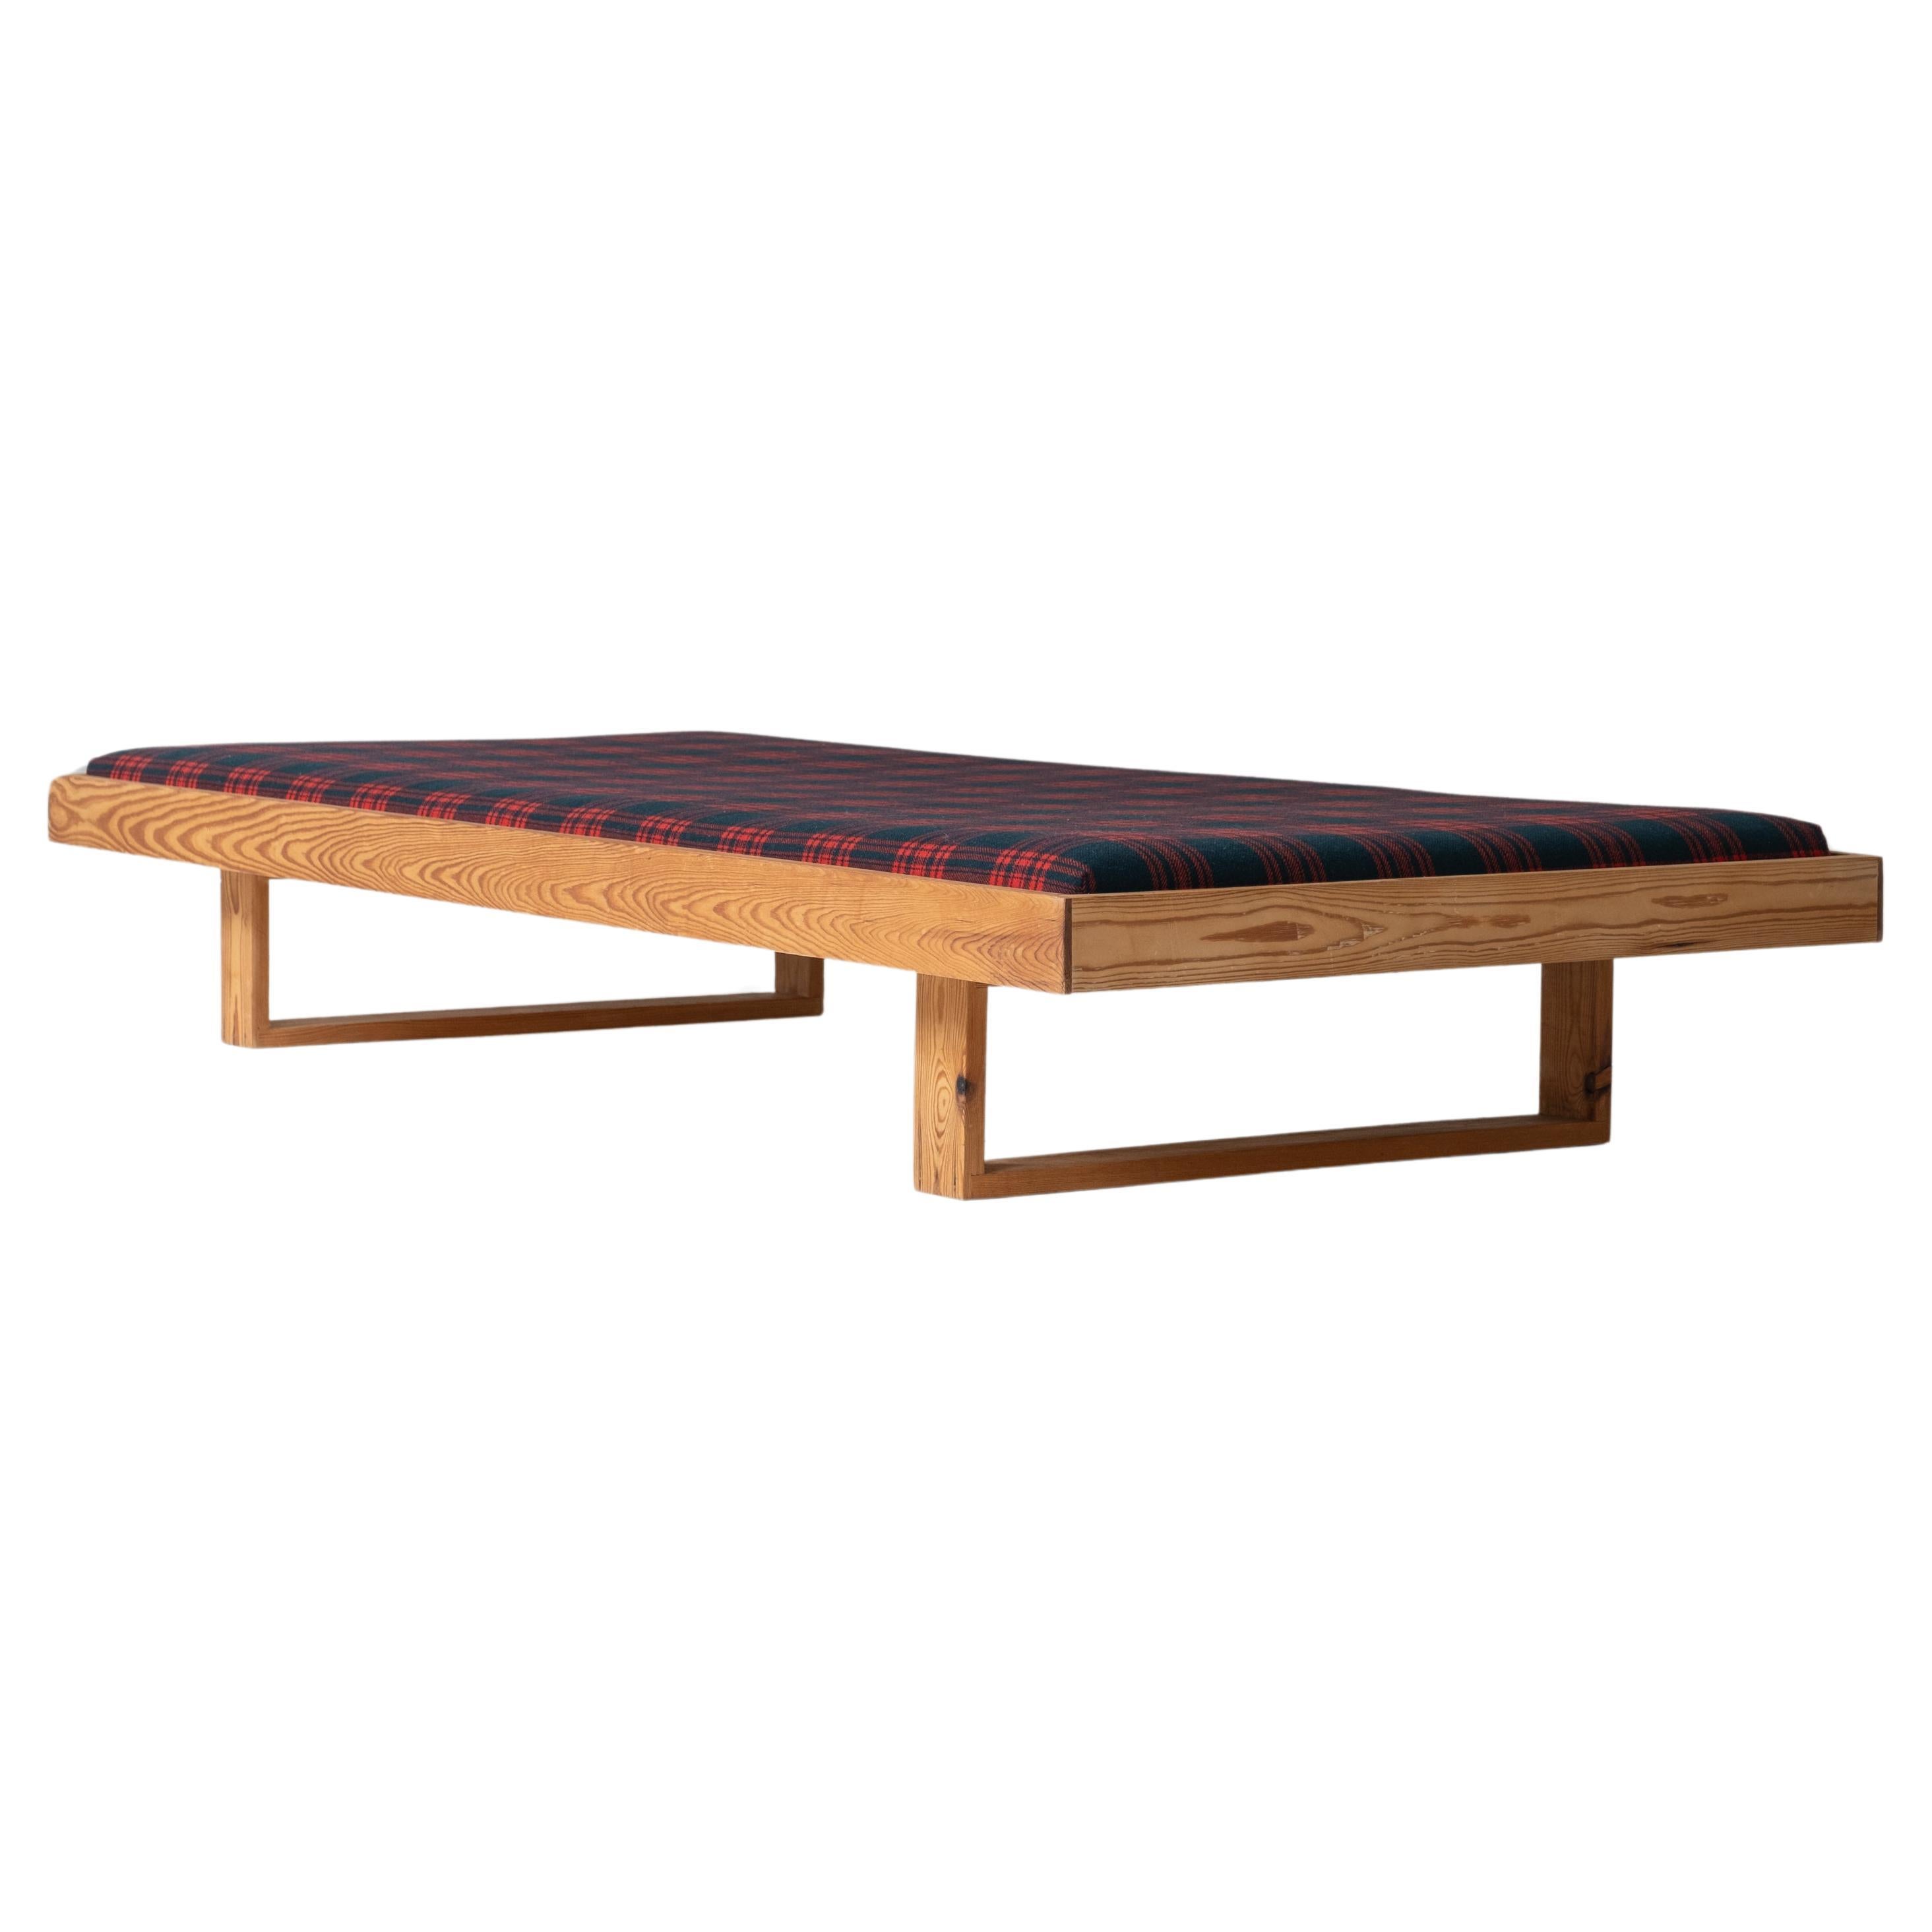 Daybed in pine from Denmark, dating from the 1960s.